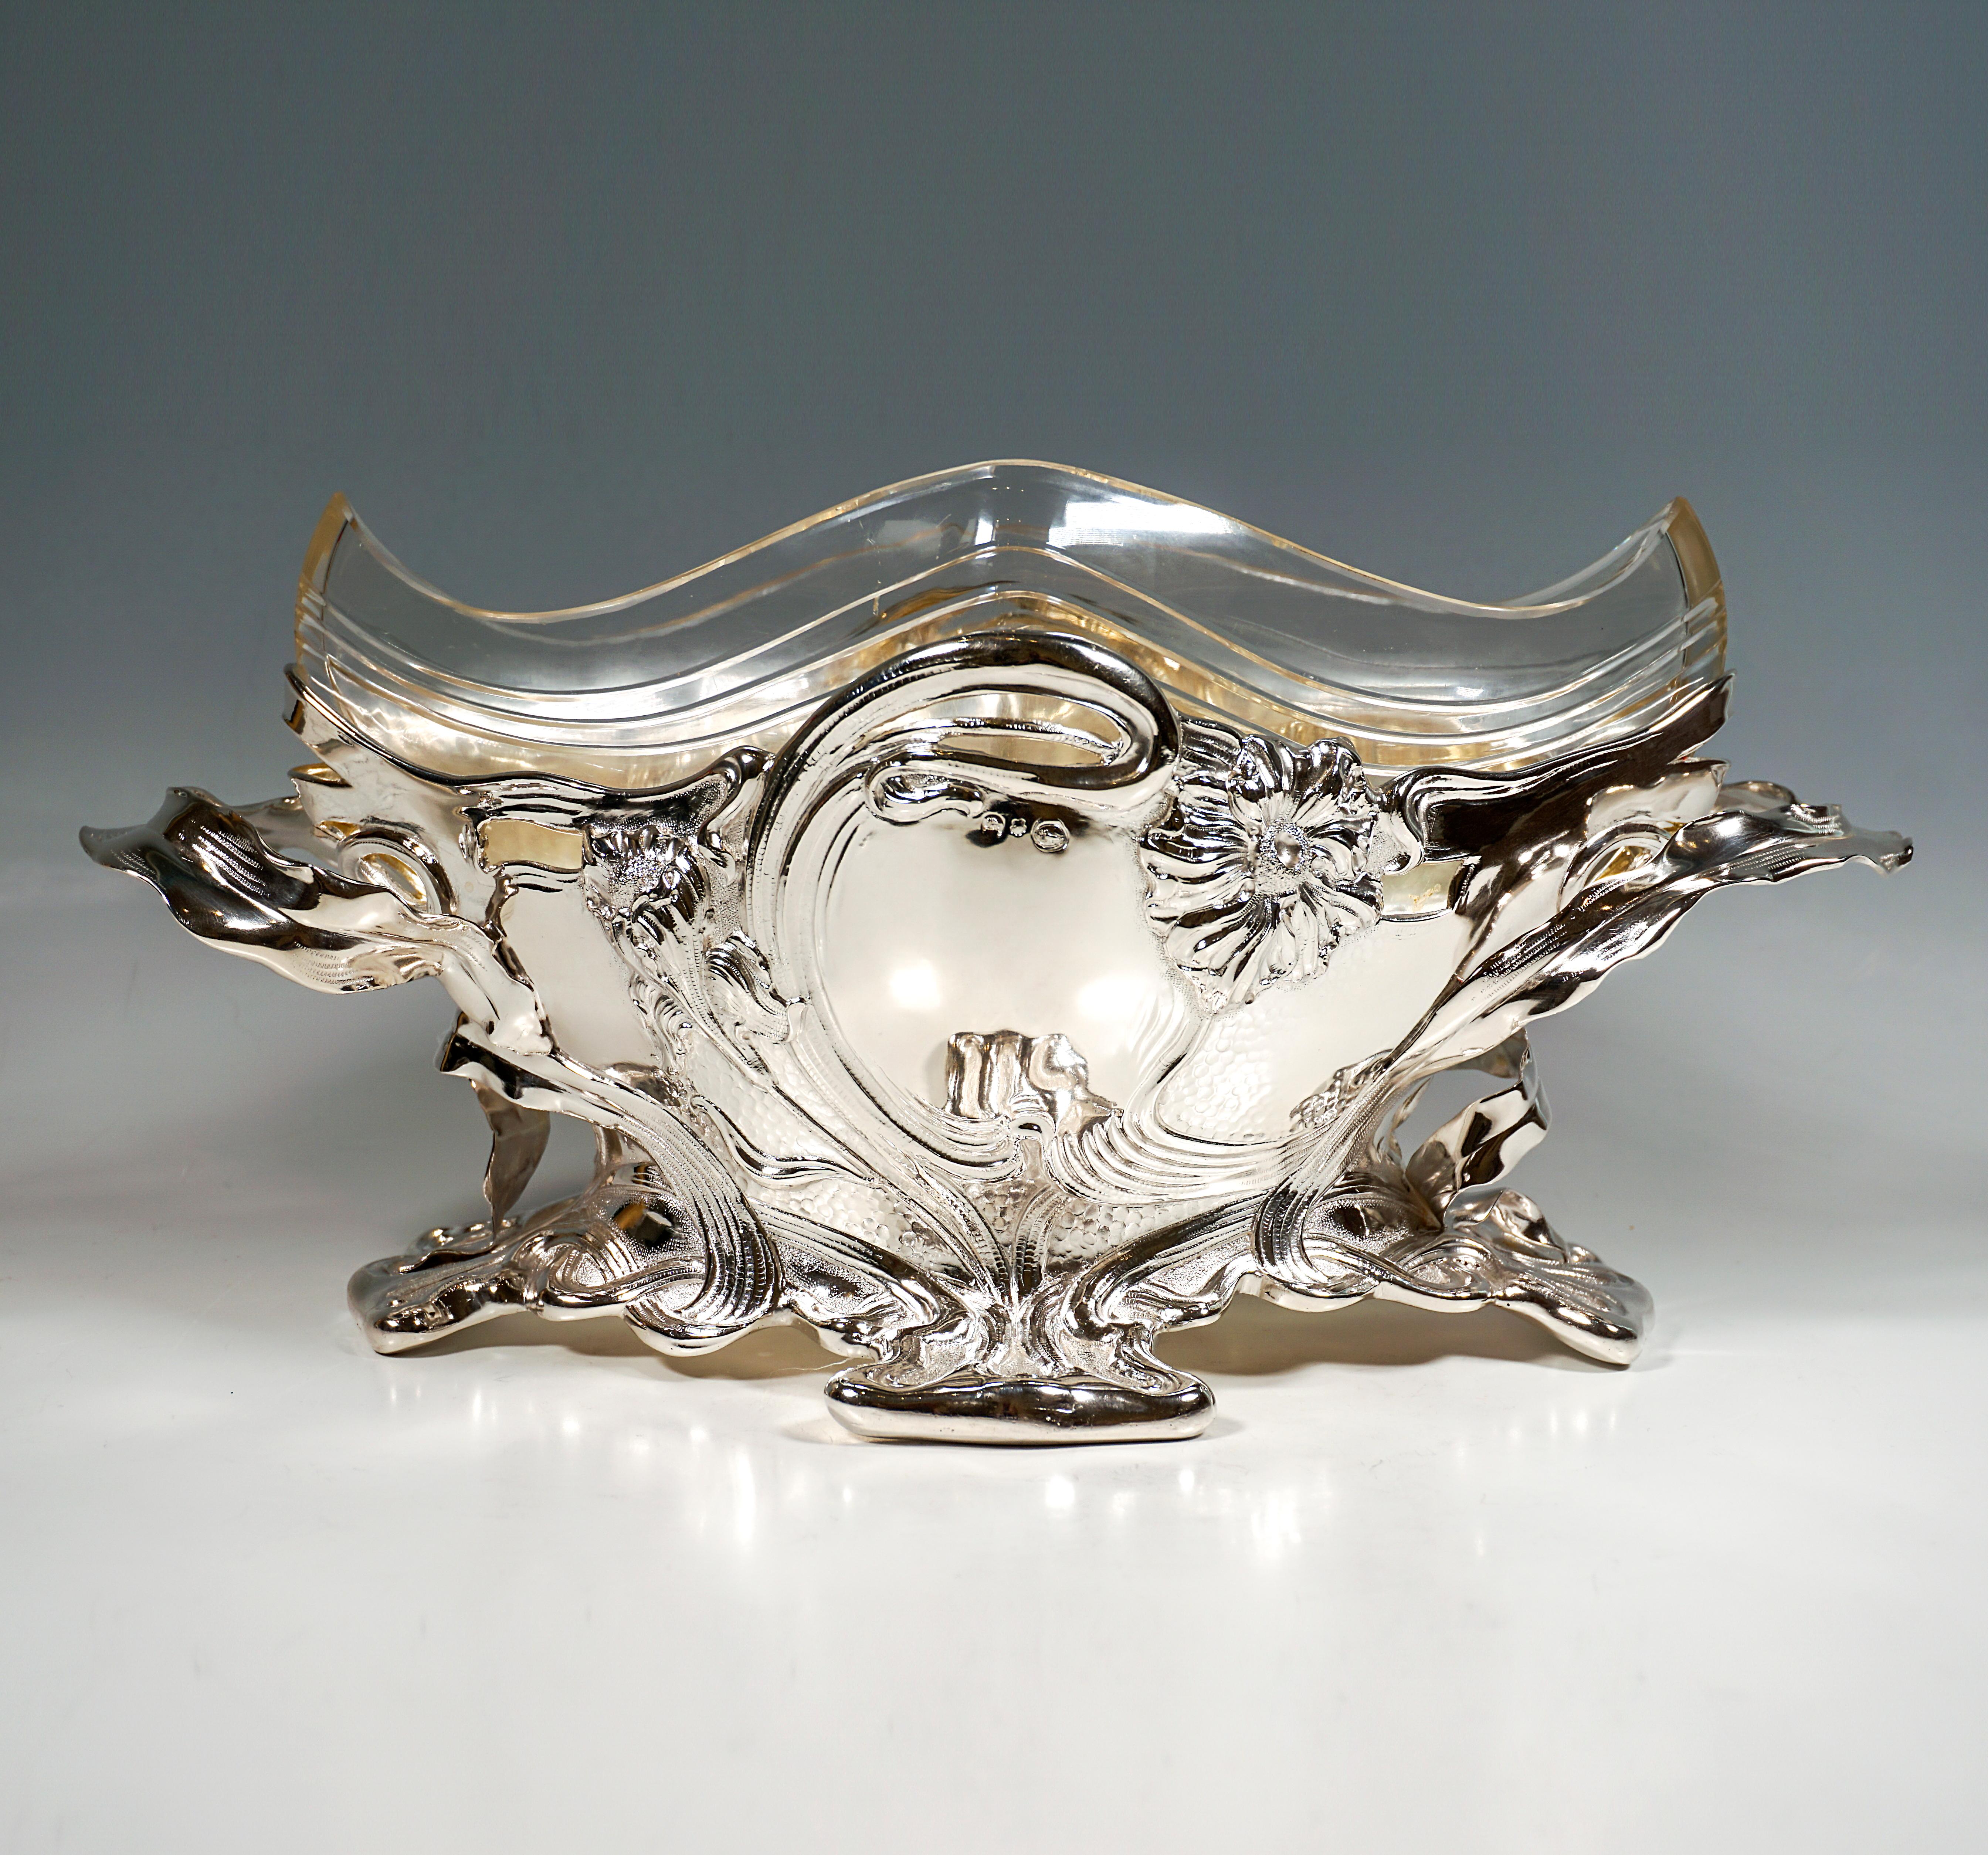 Festive solid silver vessel in the form of a navette-shaped bowl with a lobed, projecting foot resting on four points of contact, large rocaille-shaped panels on the front and back framed by floral relief decoration in the form of intertwined